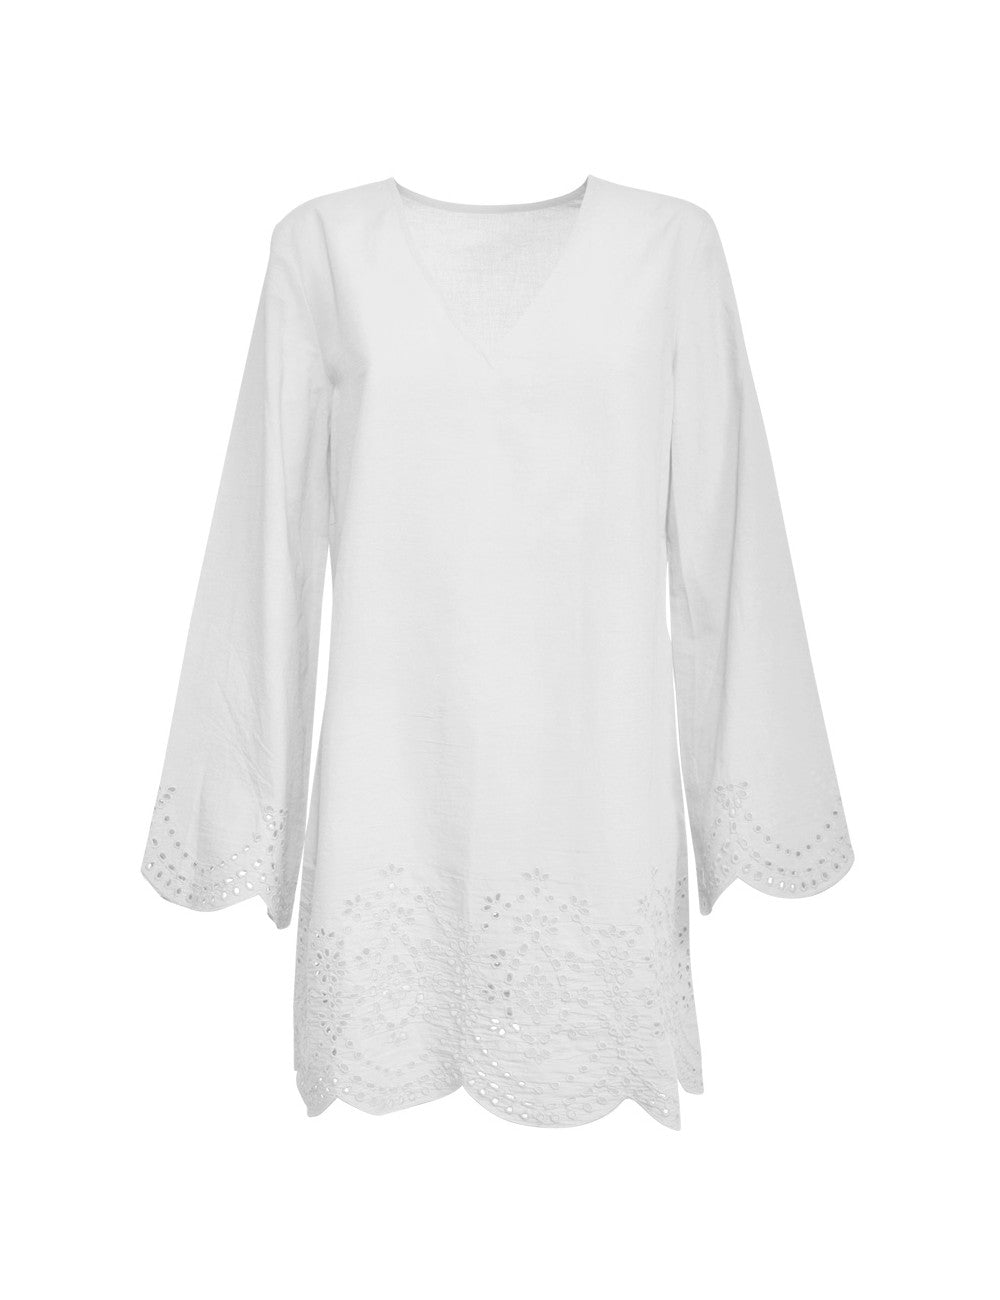 White Woven Cotton Short Kaftan by Verdissima from Italy